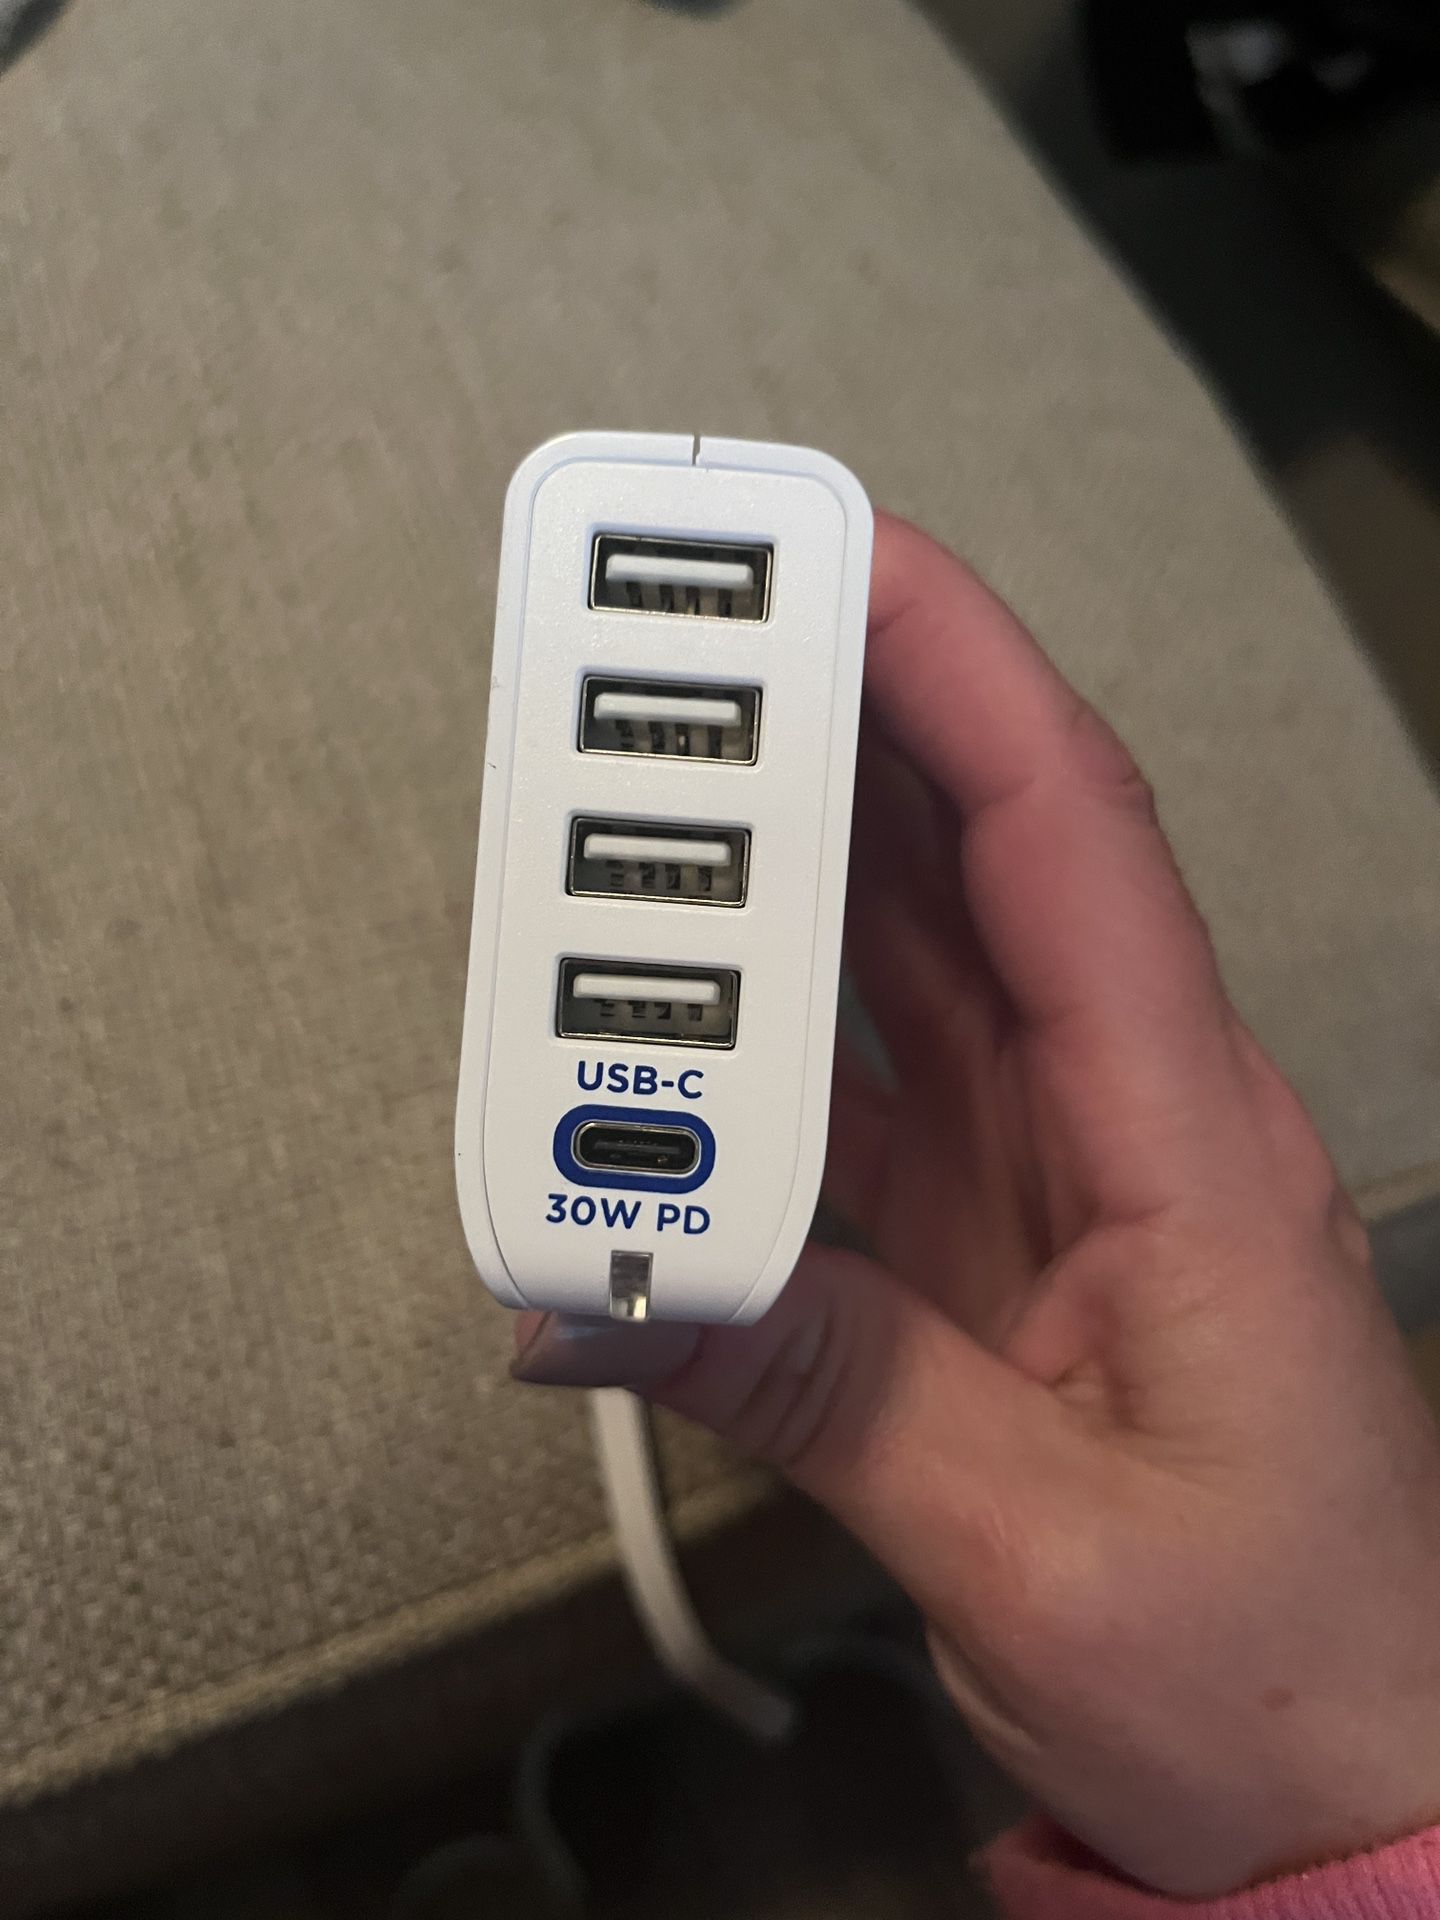 5 Port USB Charger